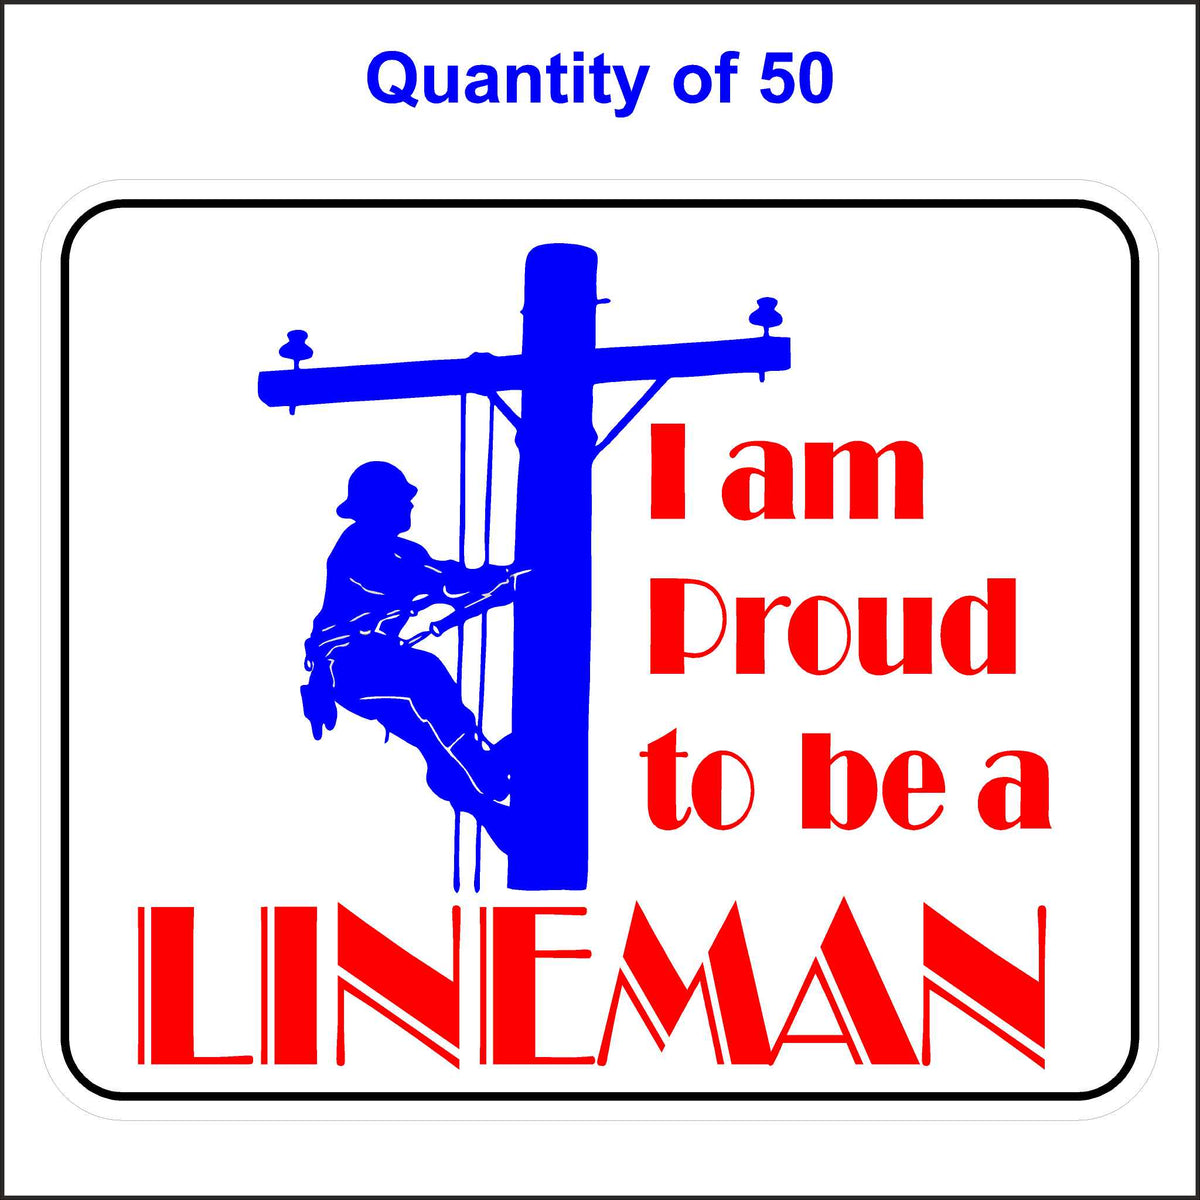 I Am Proud to Be a Lineman Sticker. 50 Quantity.